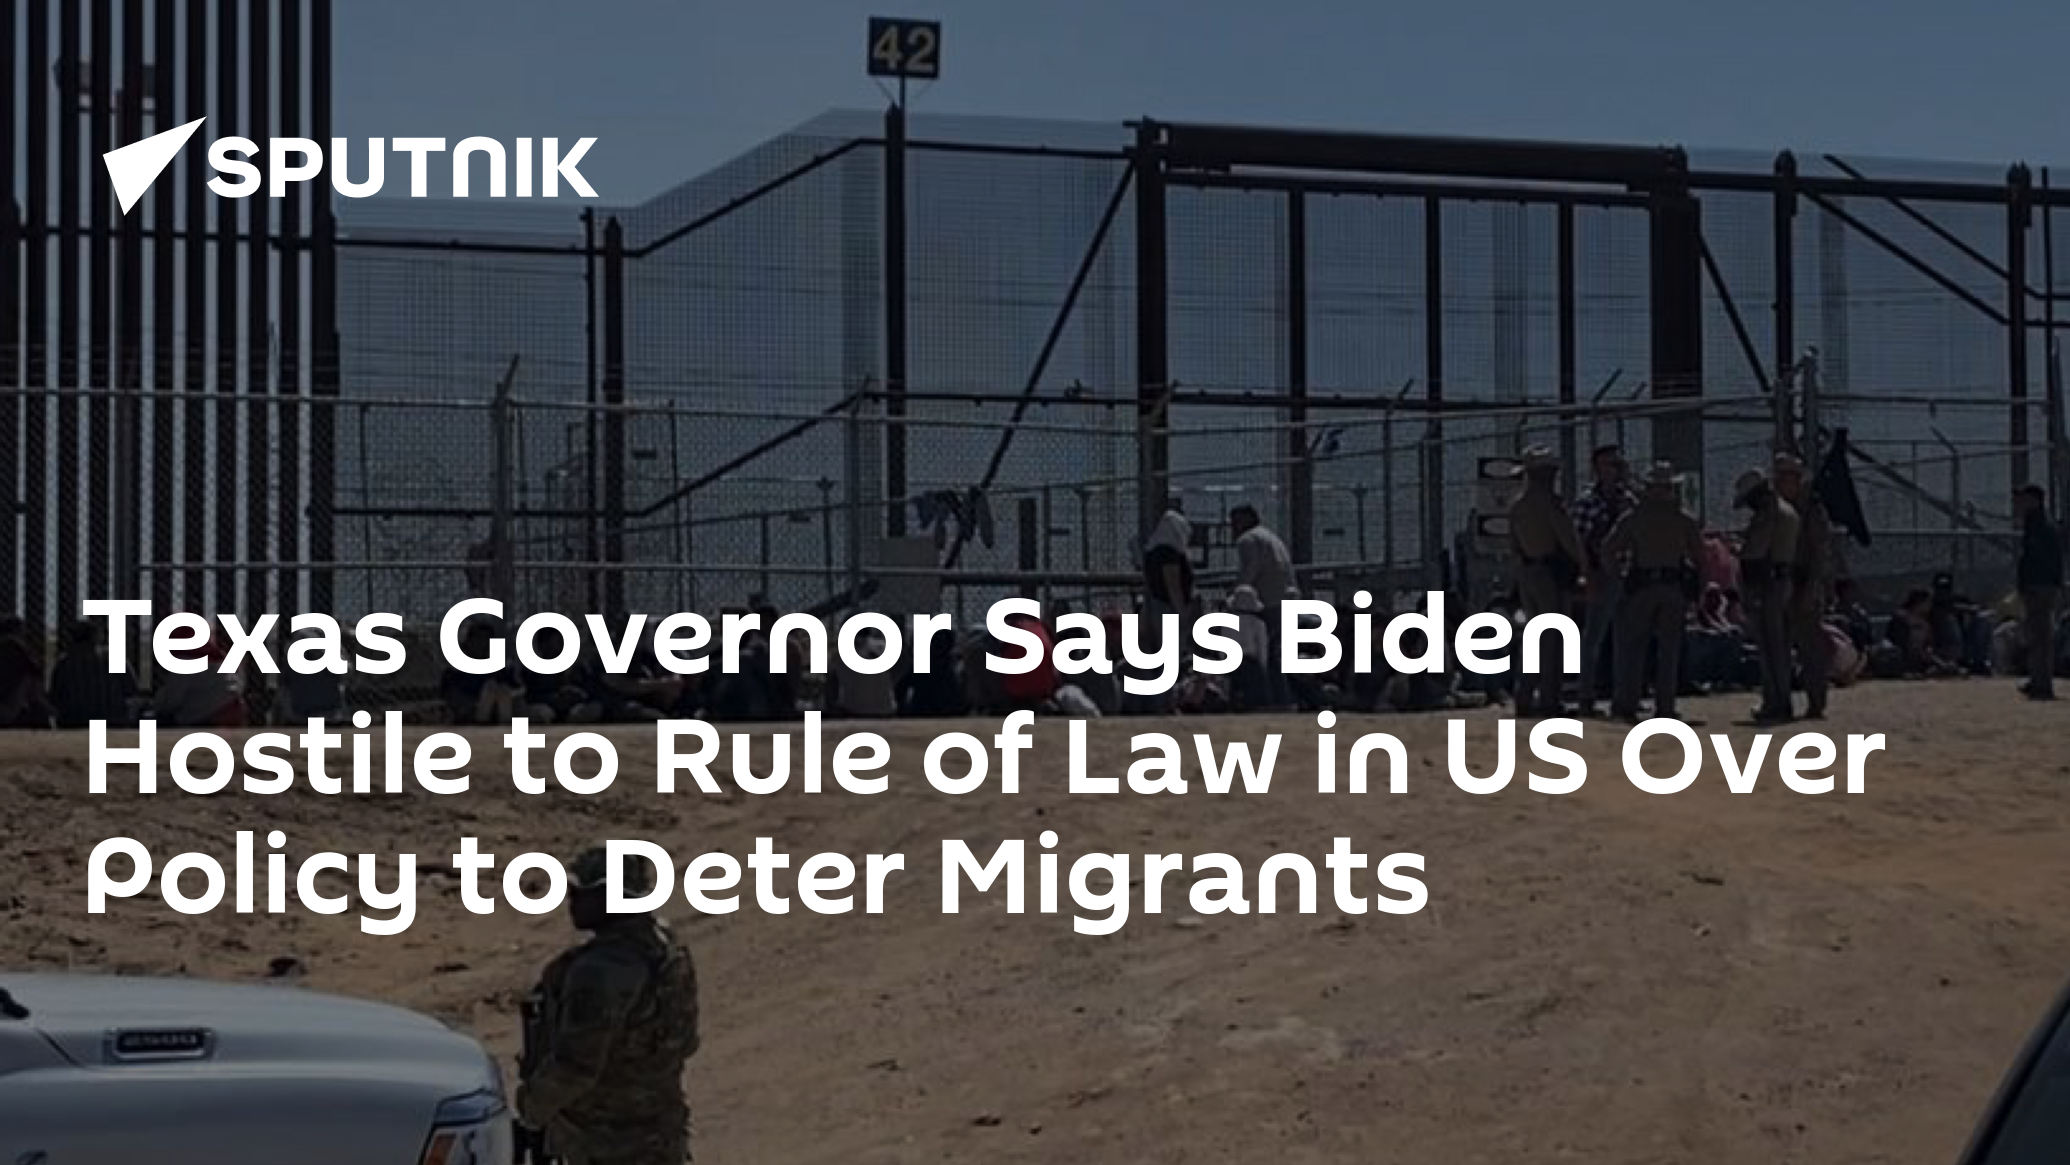 Texas Governor Says Biden Hostile to Rule of Law in US Over Policy to Deter Migrants